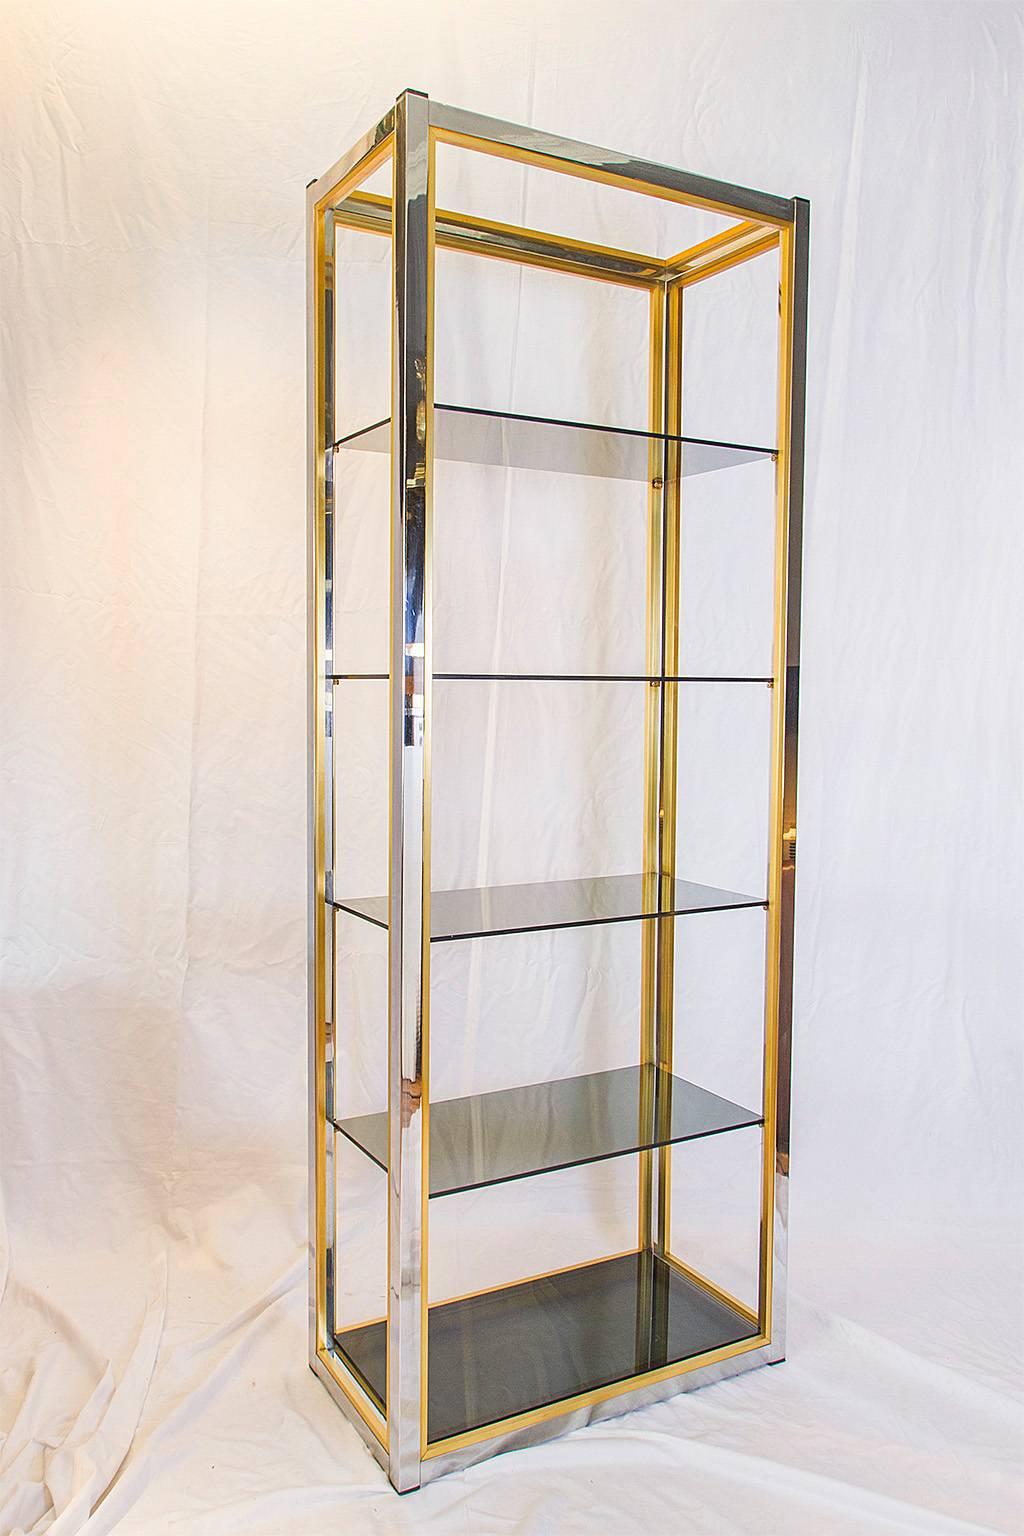 Beautiful and elegant etagère shelving unit with five glass shelves supported by a chrome and brass frame.

Please contact us for delivery details.